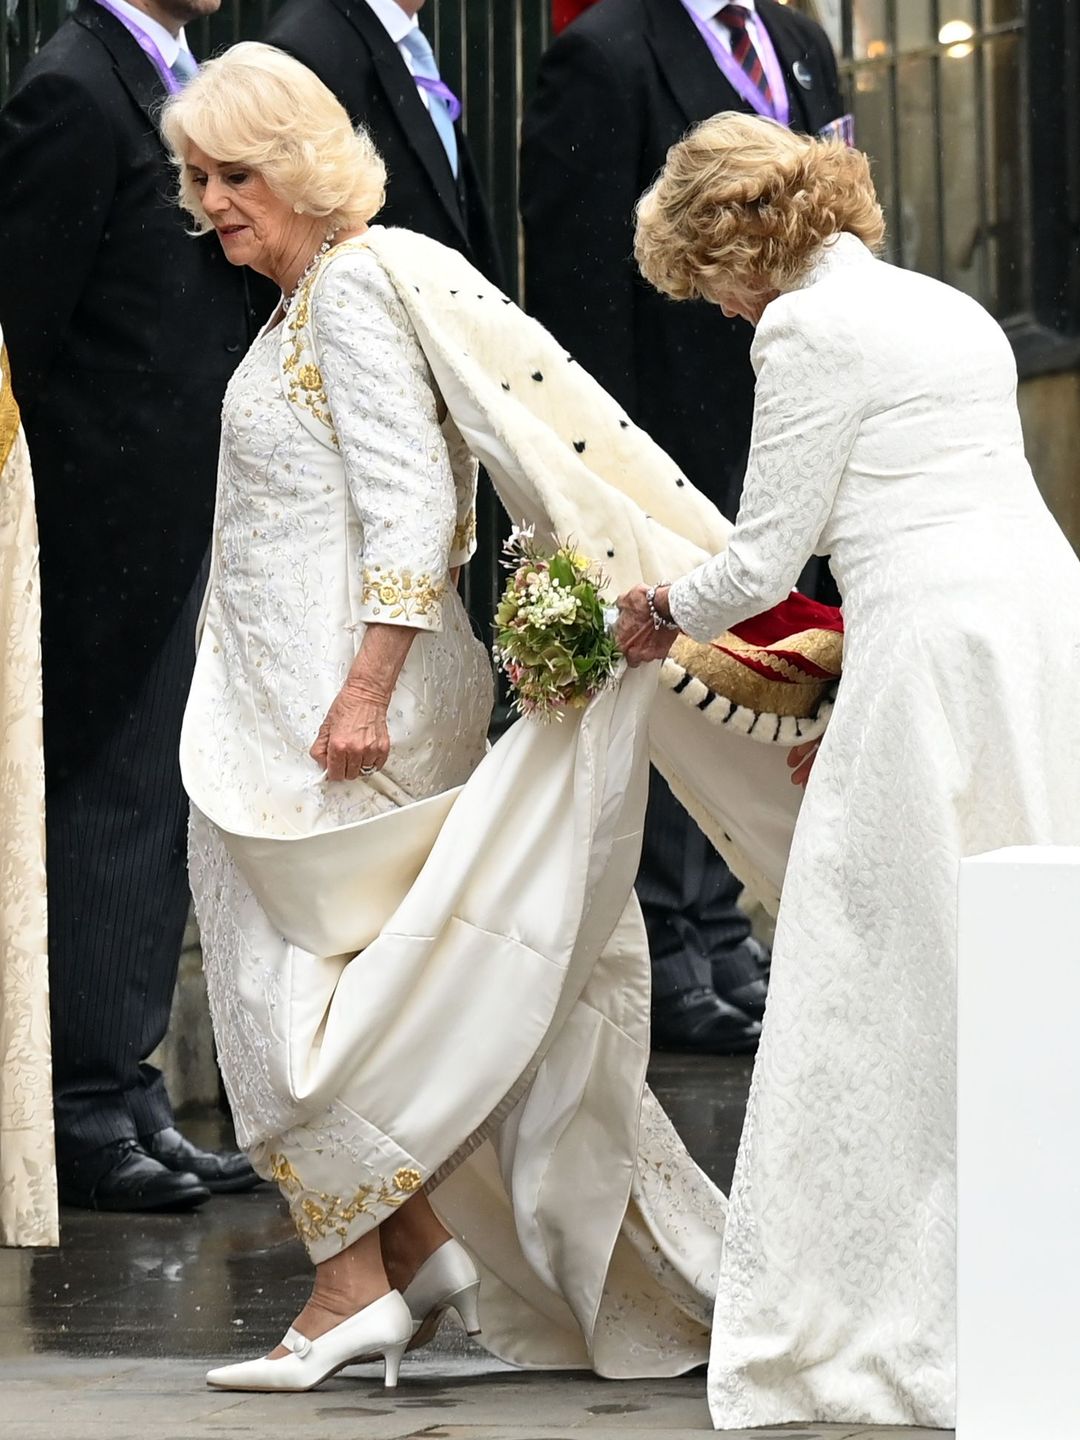 Queen Camilla's lady in attendance fixes her dress ahead of the coronation at Westminster Abbey